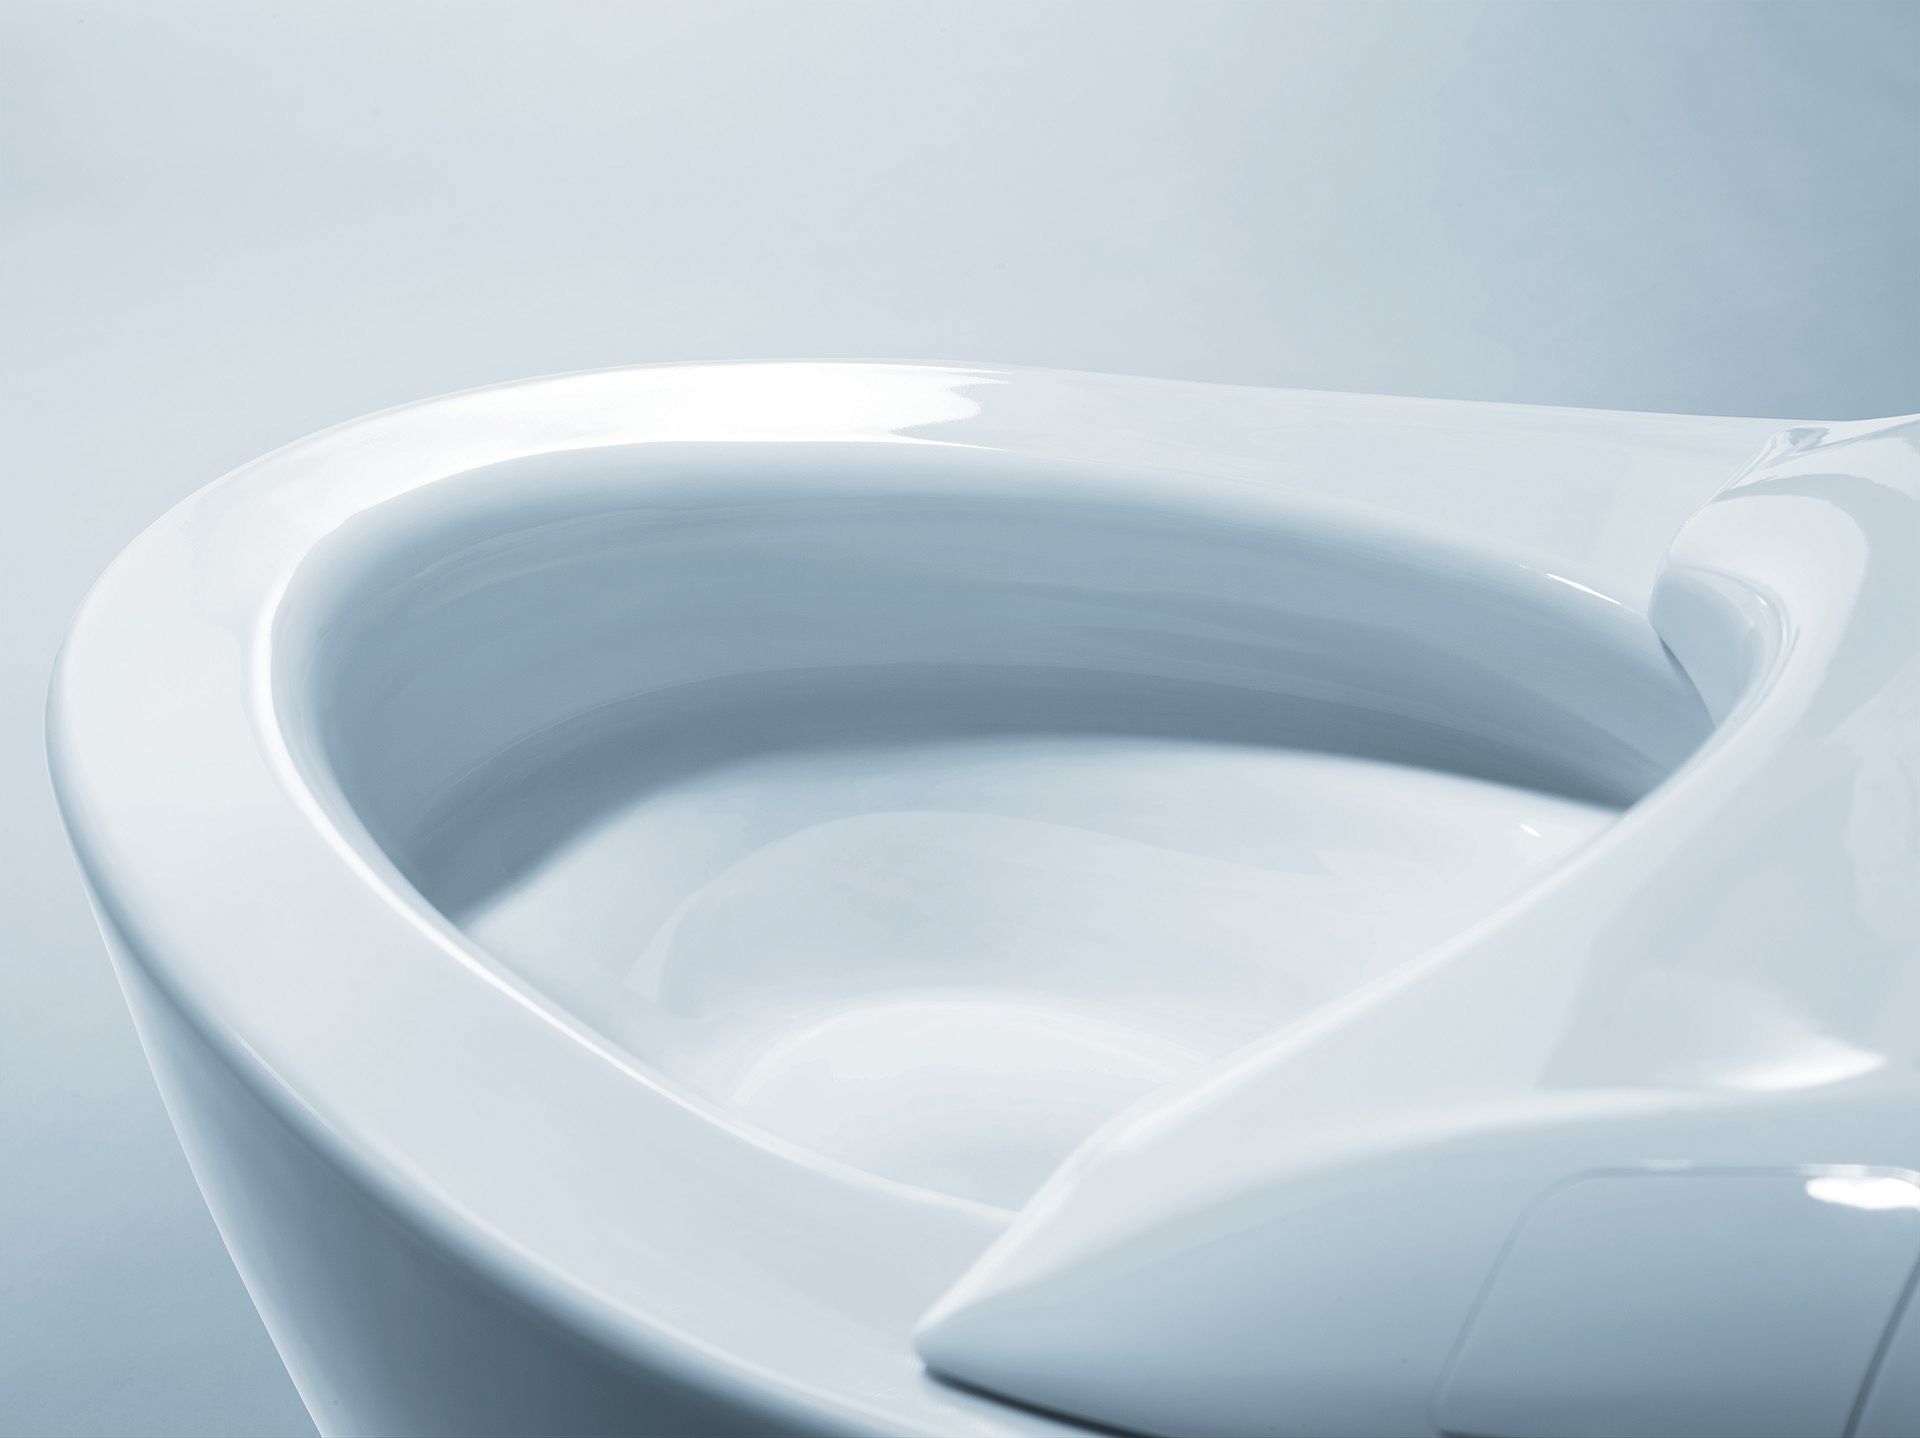 detail view of modern toilet interior bowl and seat